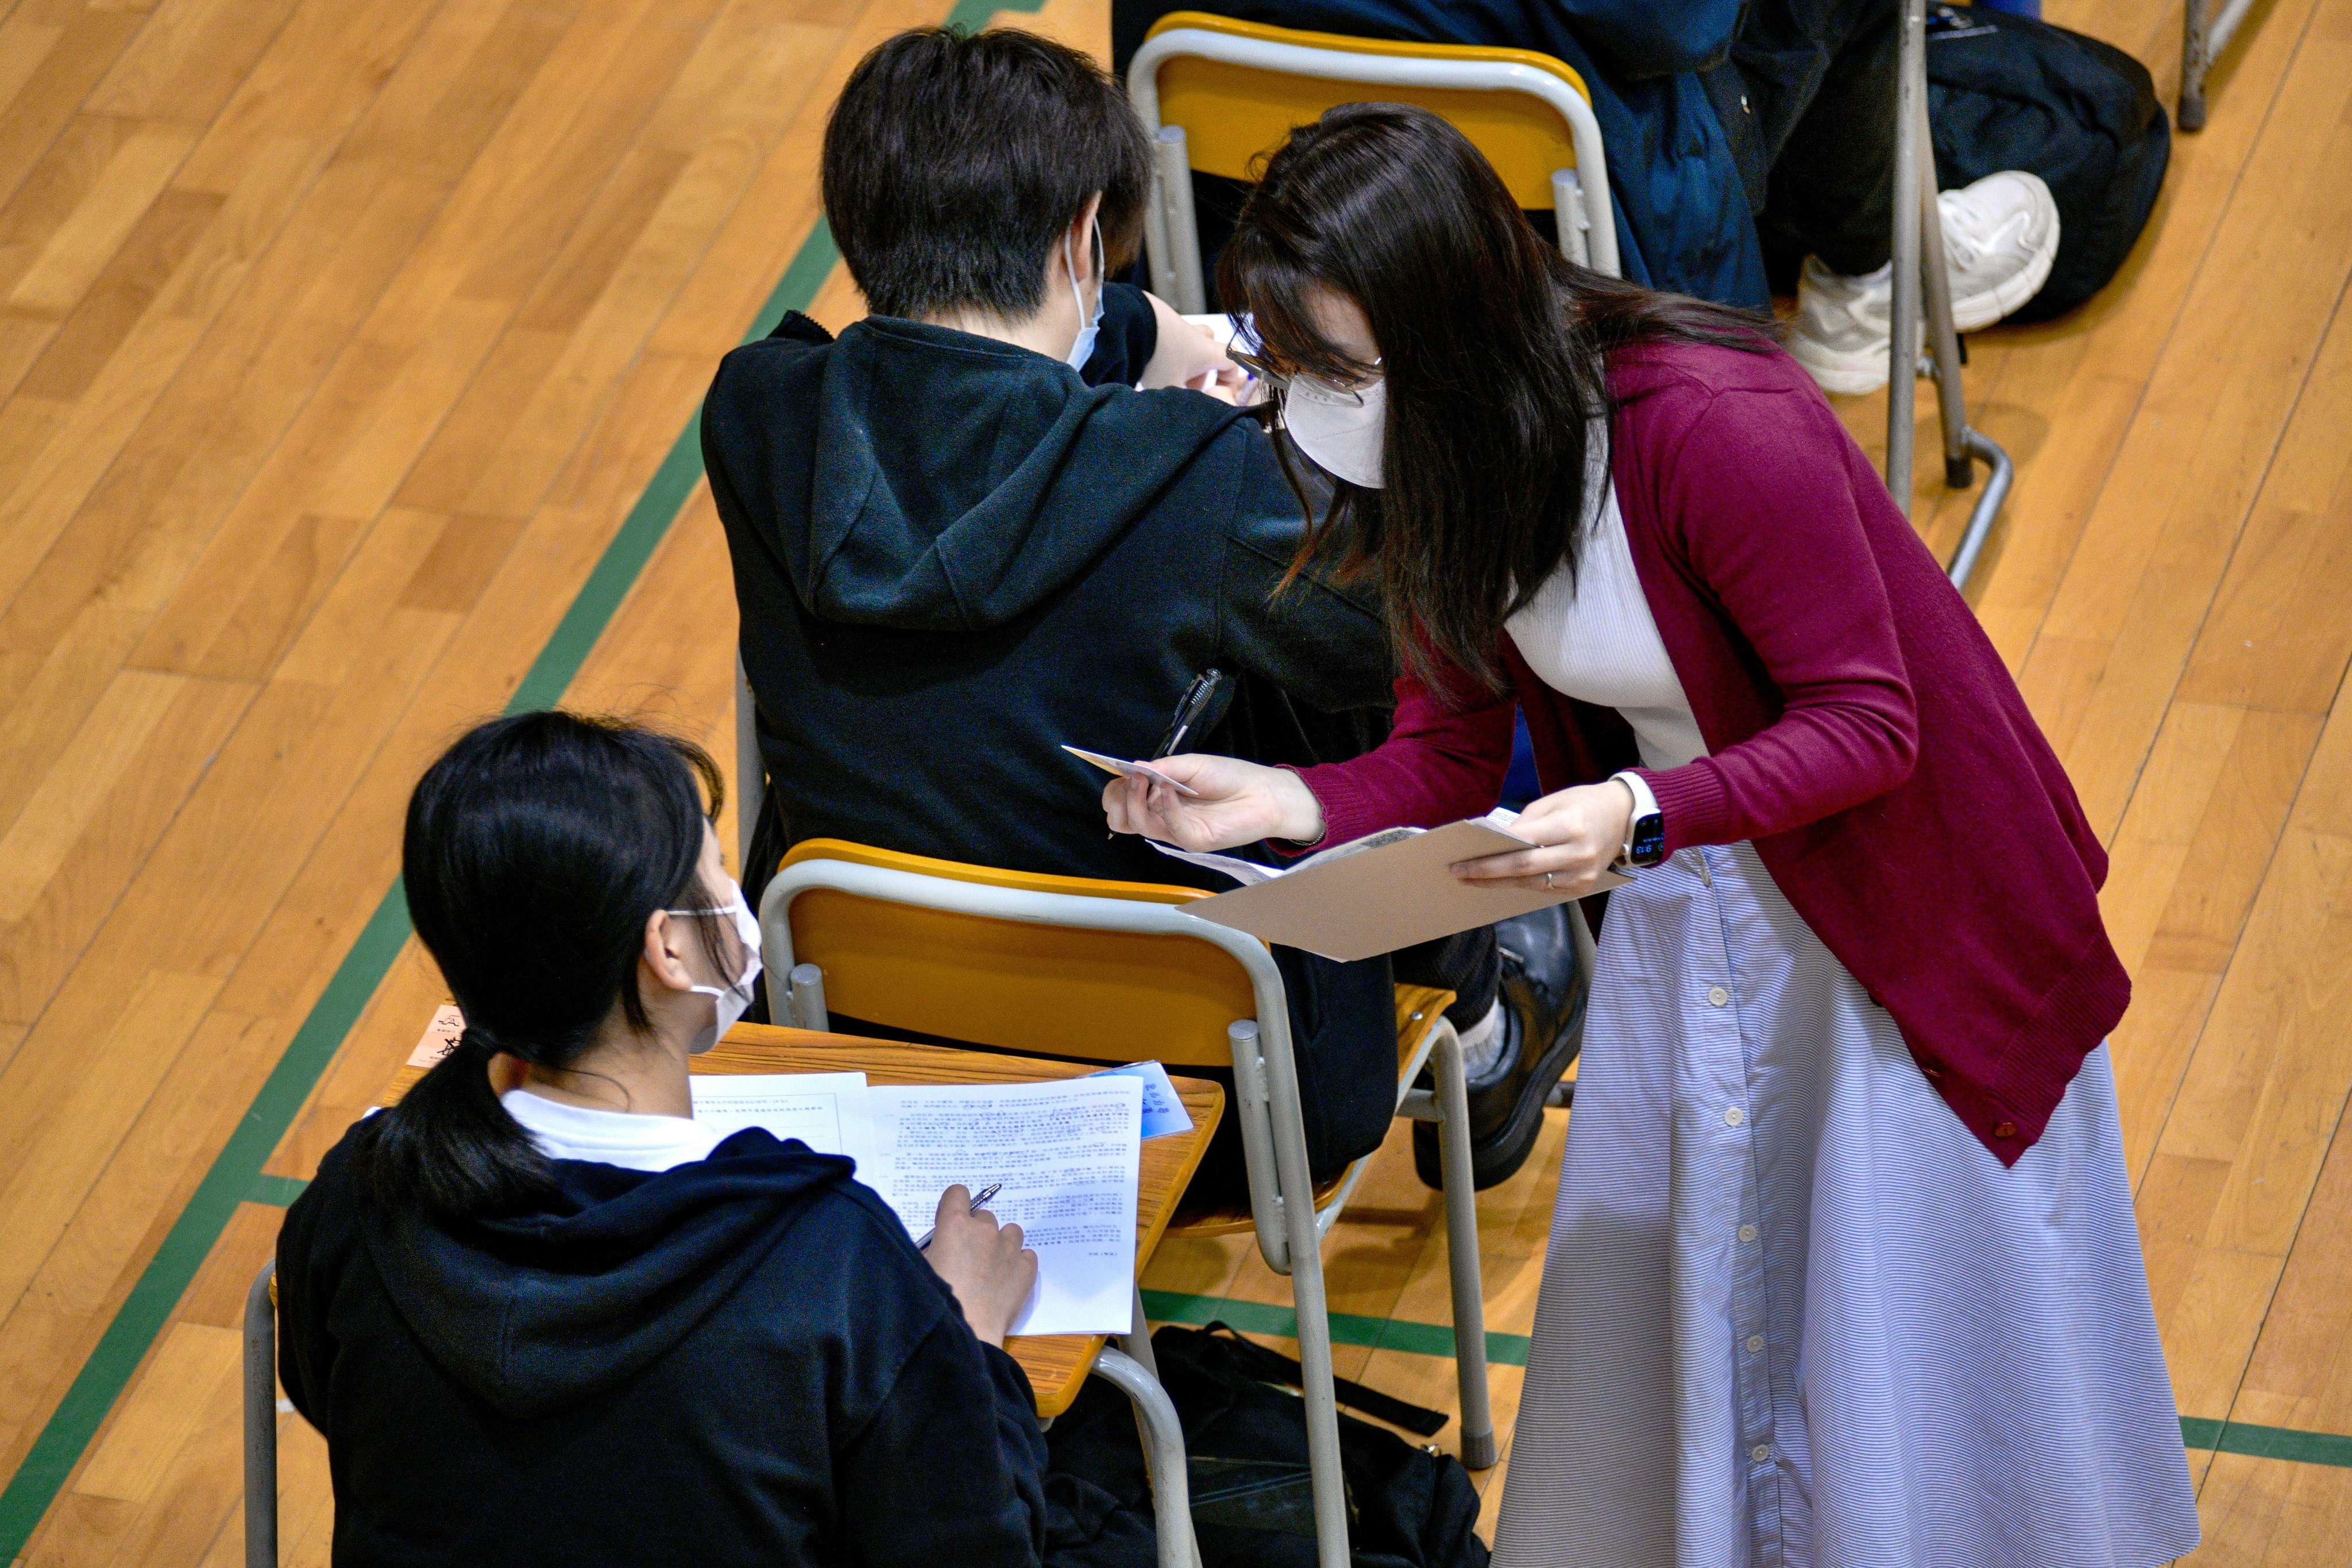 Students sit one of this year’s DSE exams, the university entrance tests in Hong Kong. Photo: Handout